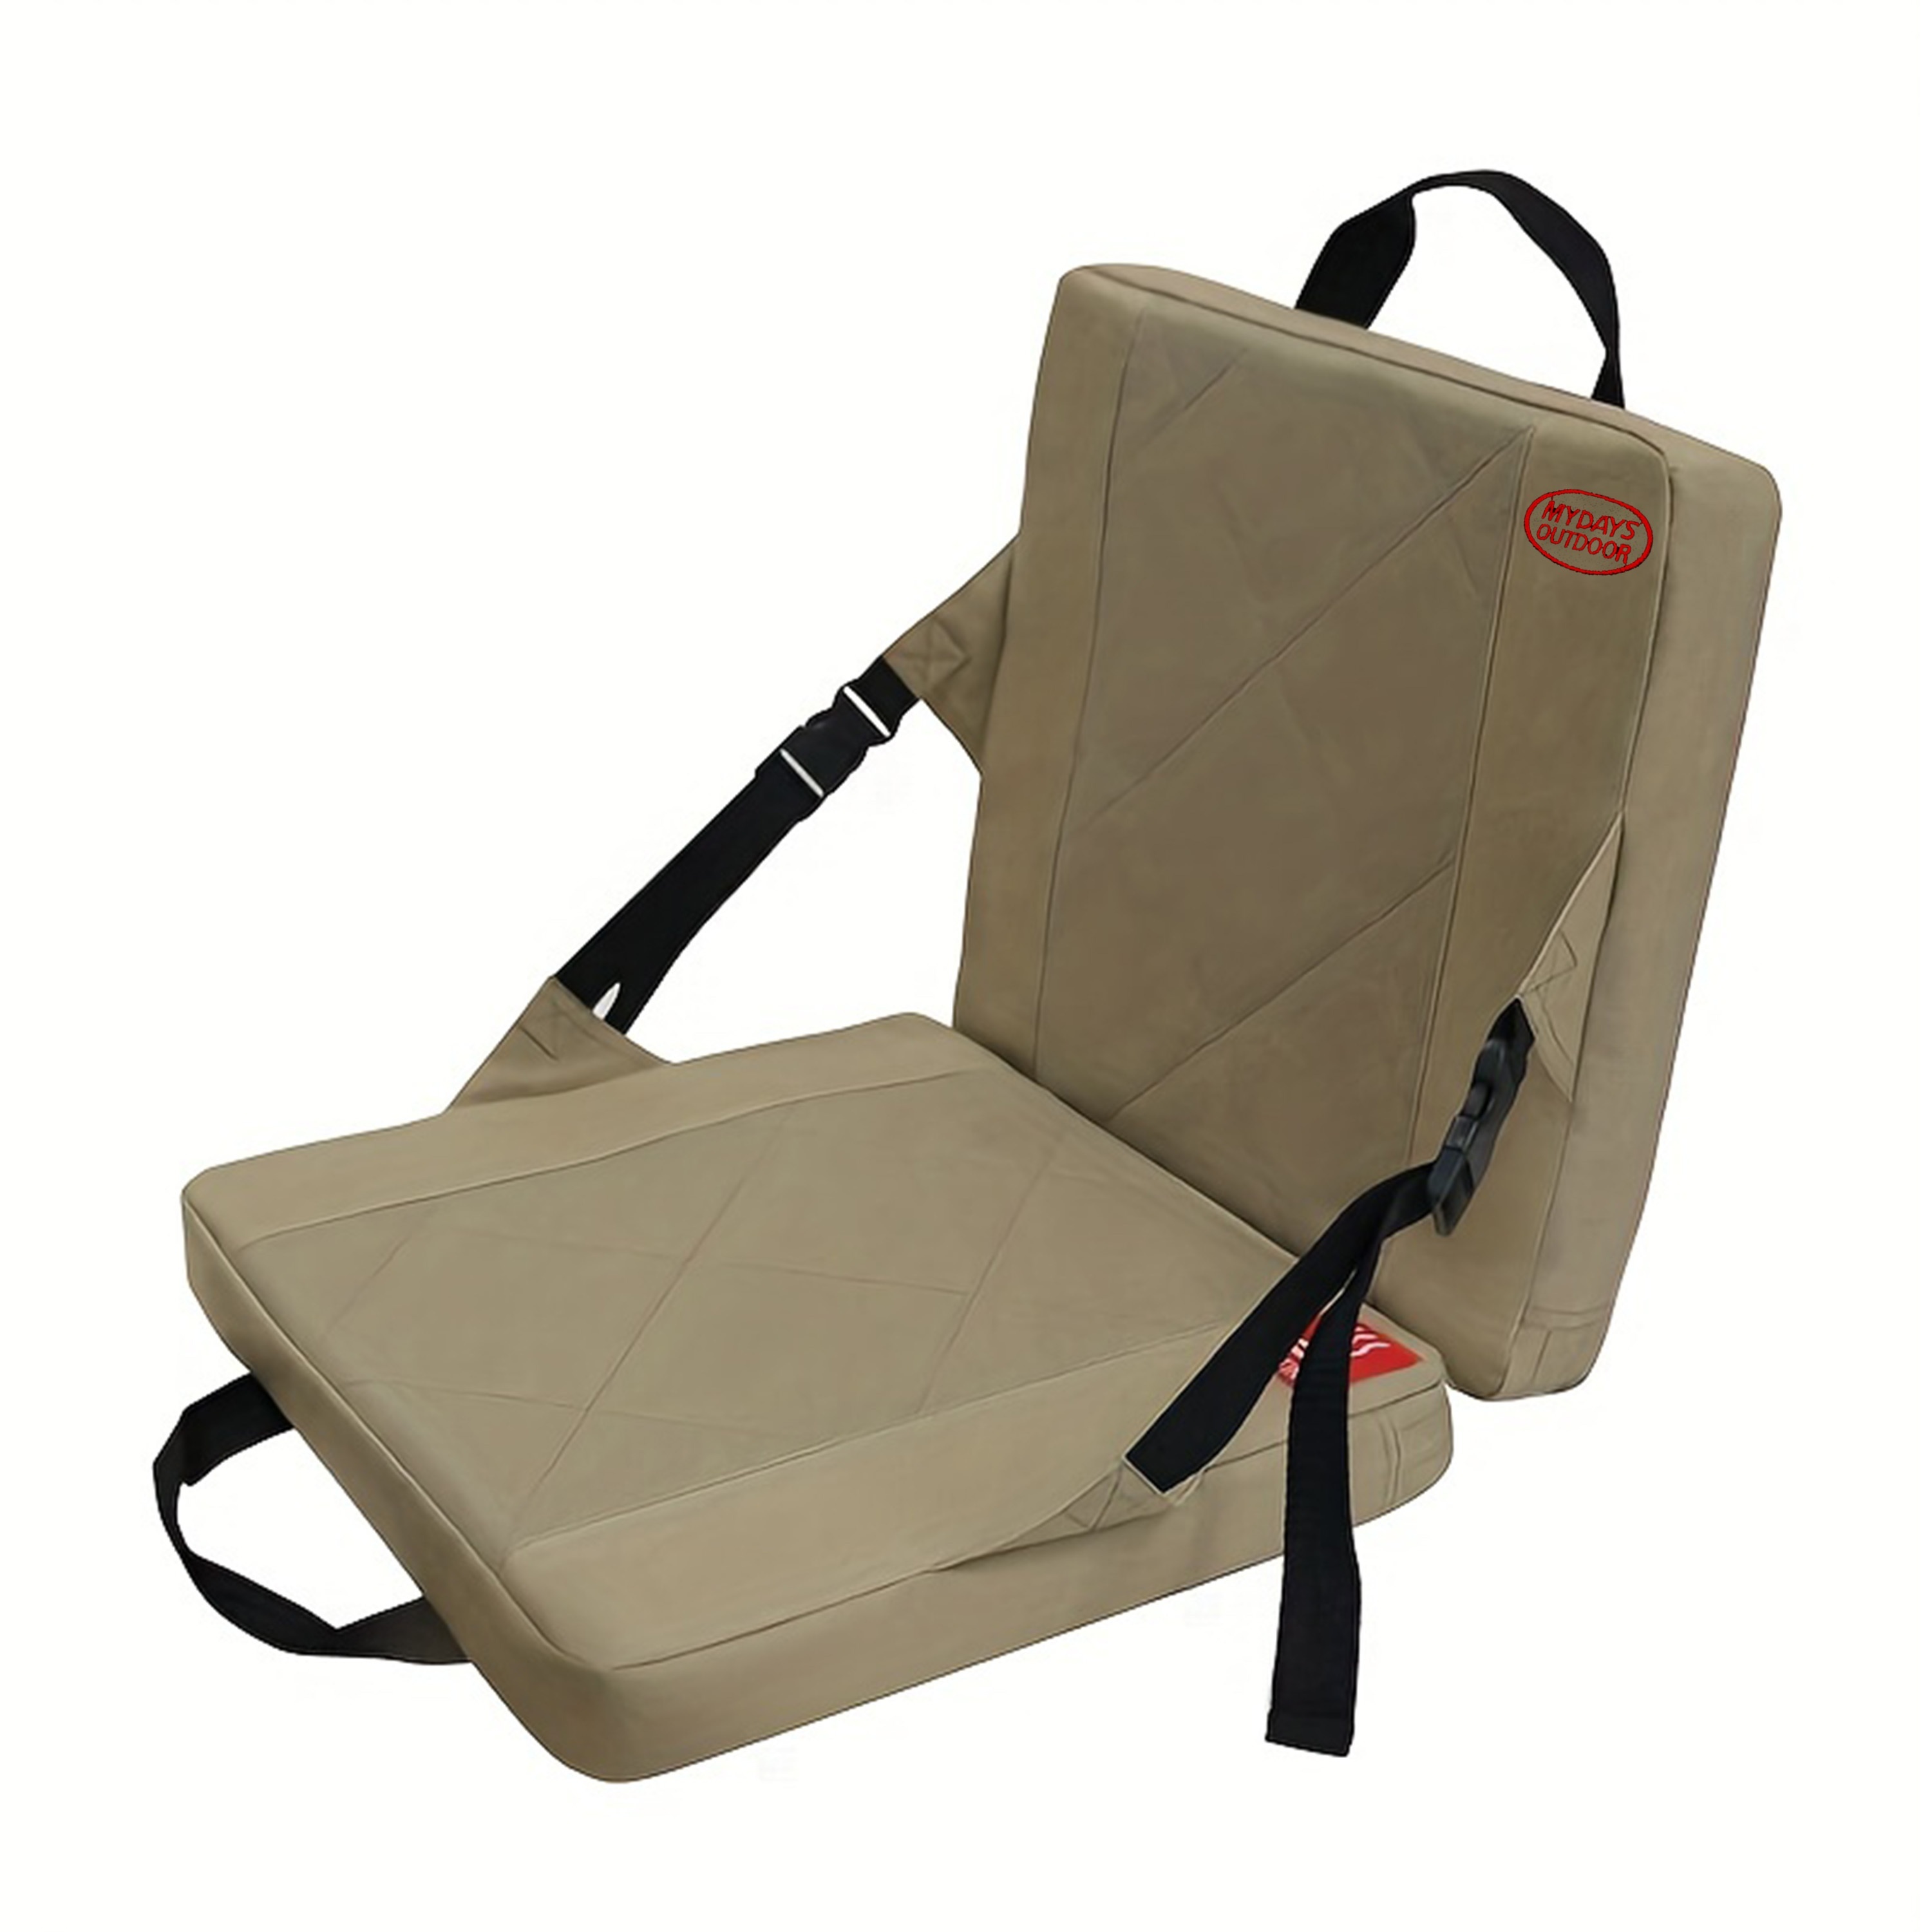 Portable Heated Seat Cushion for Stadiums